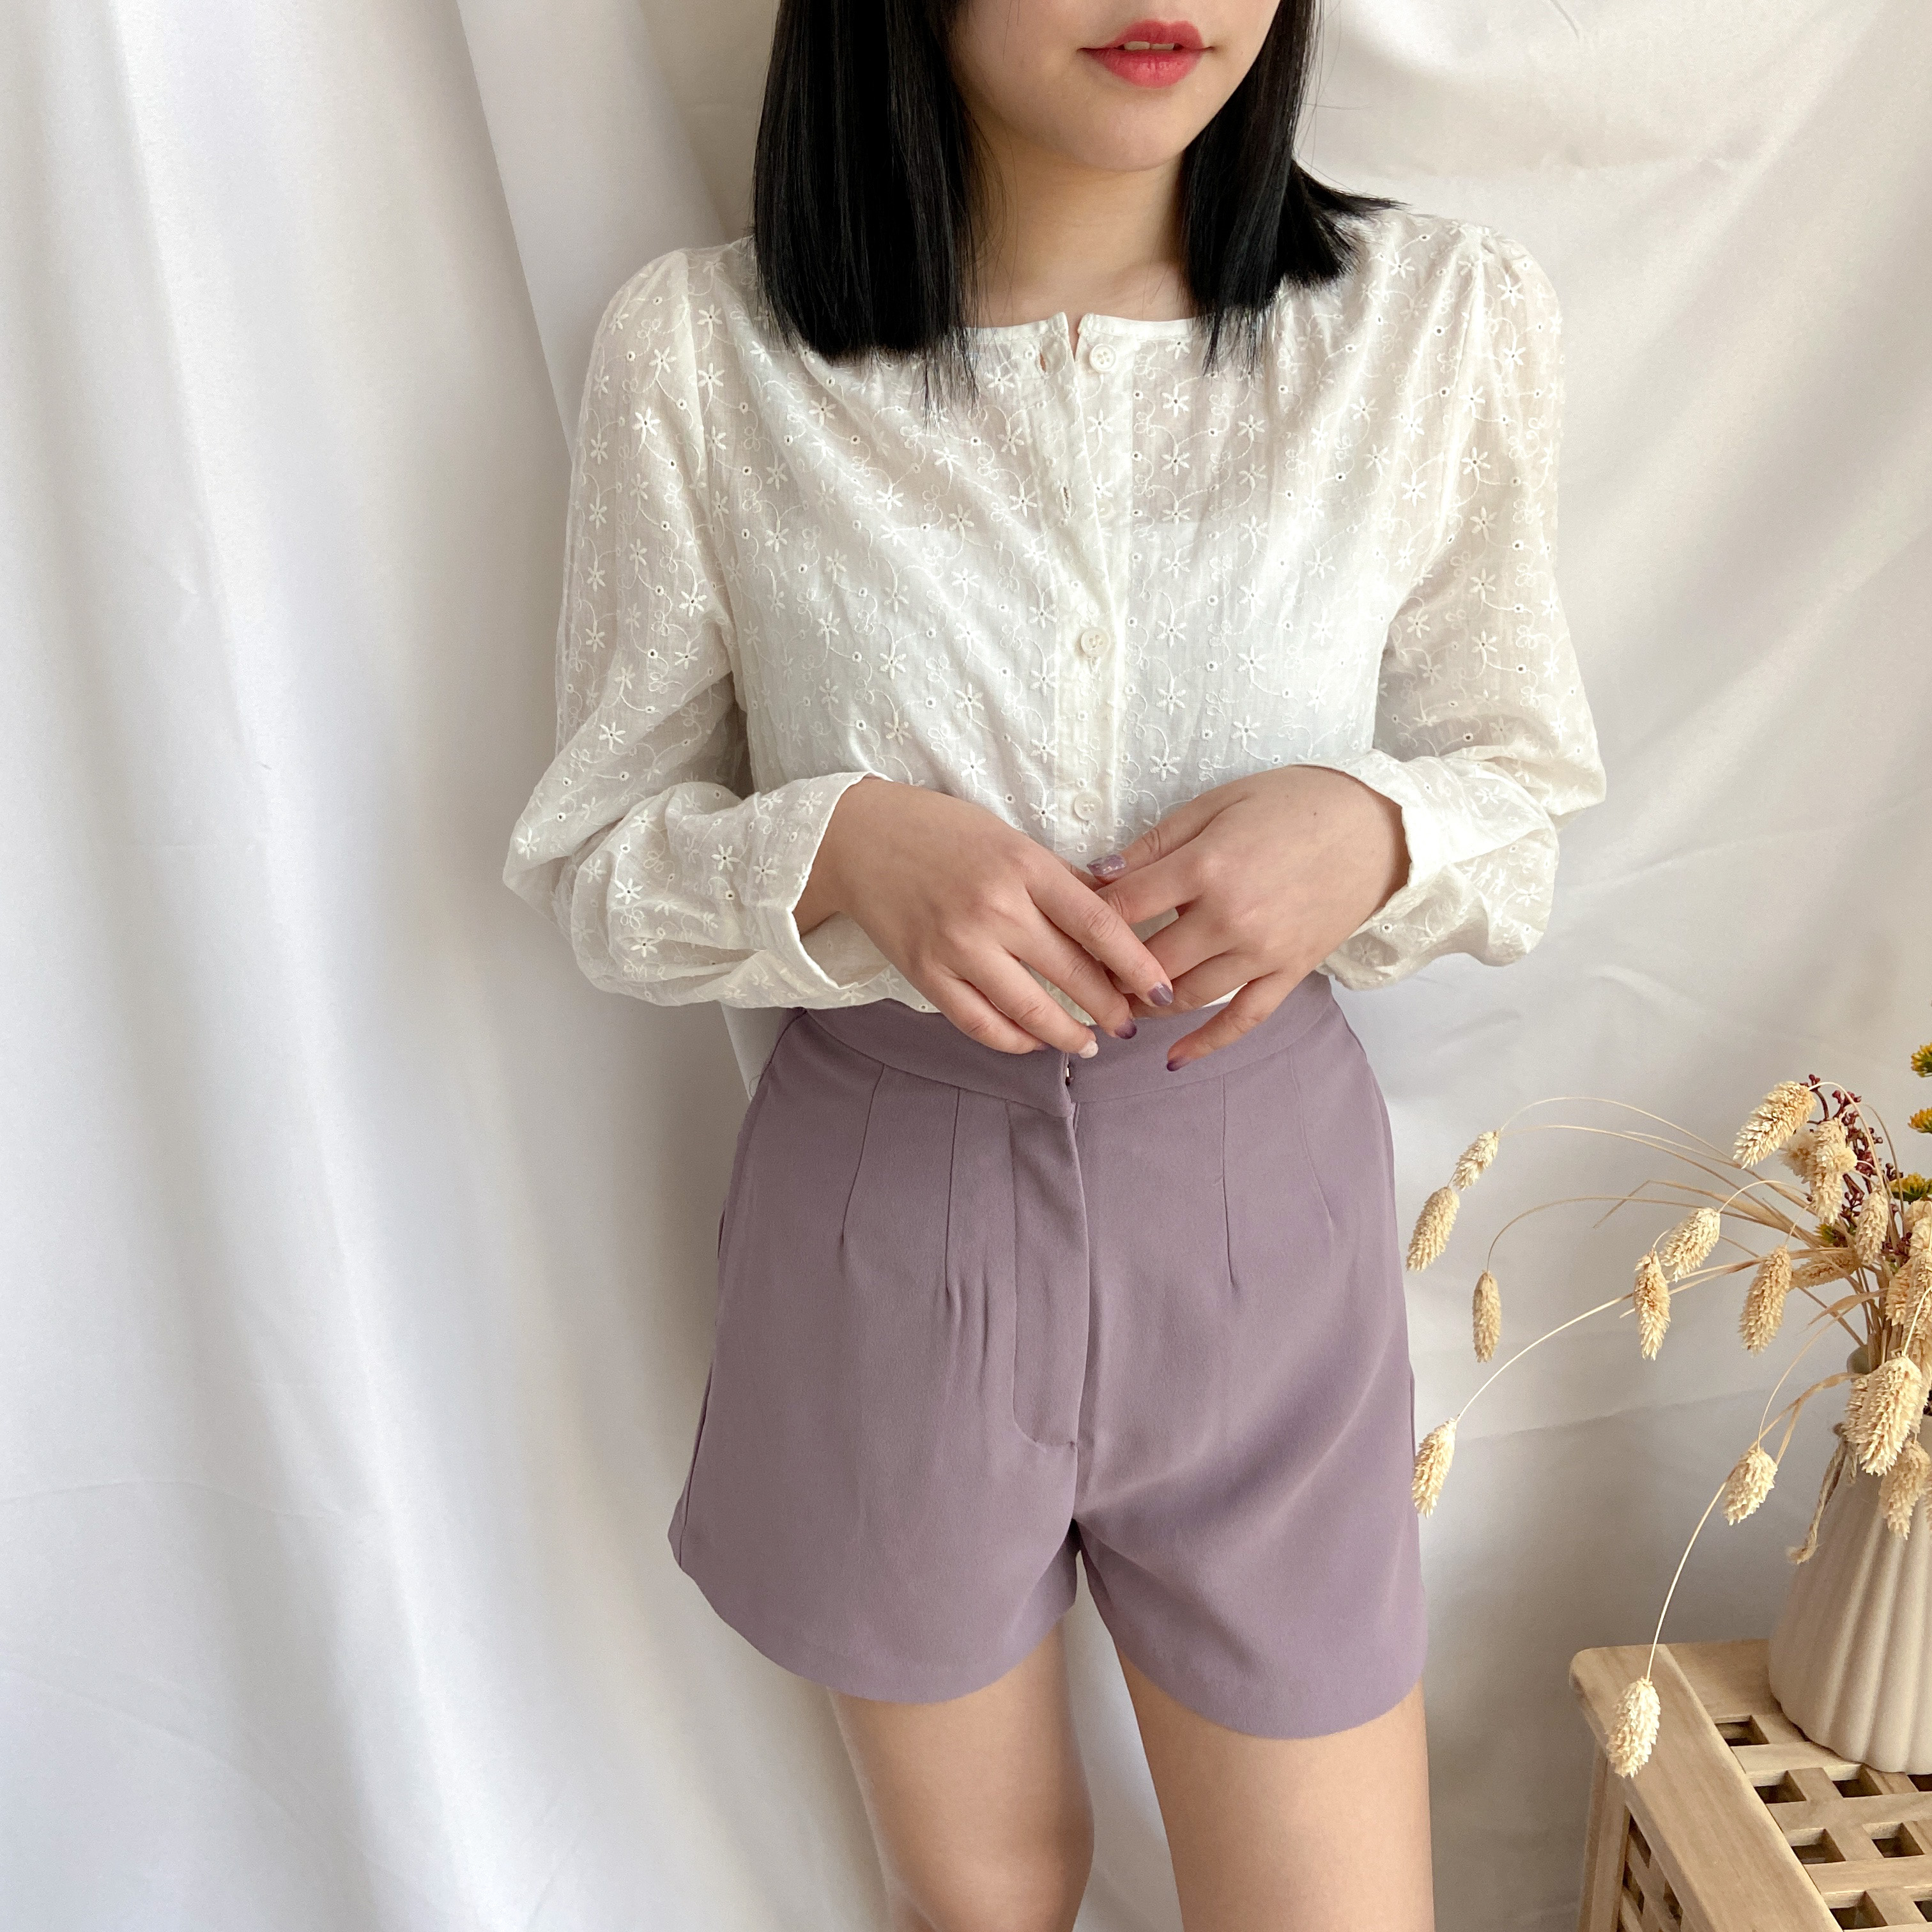 [REJECTED ITEM] Buttoned Embroidery Floral Crochet Long-Sleeve Blouse in White 白色绣花镂空排扣上衣